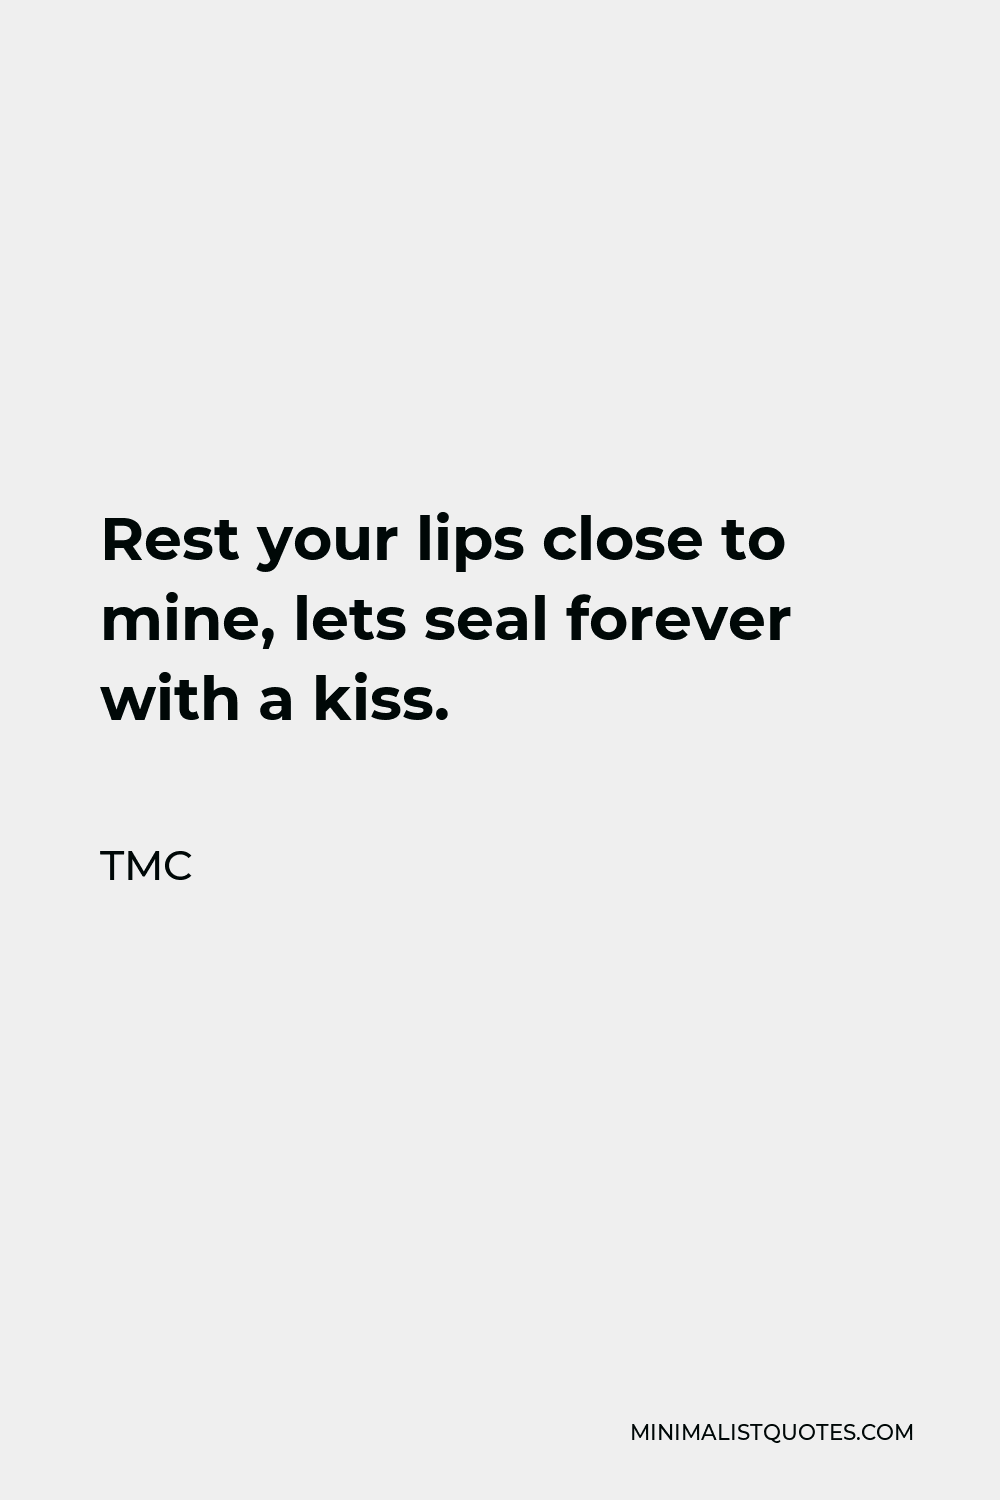 TMC Quote - Rest your lips close to mine, lets seal forever with a kiss.